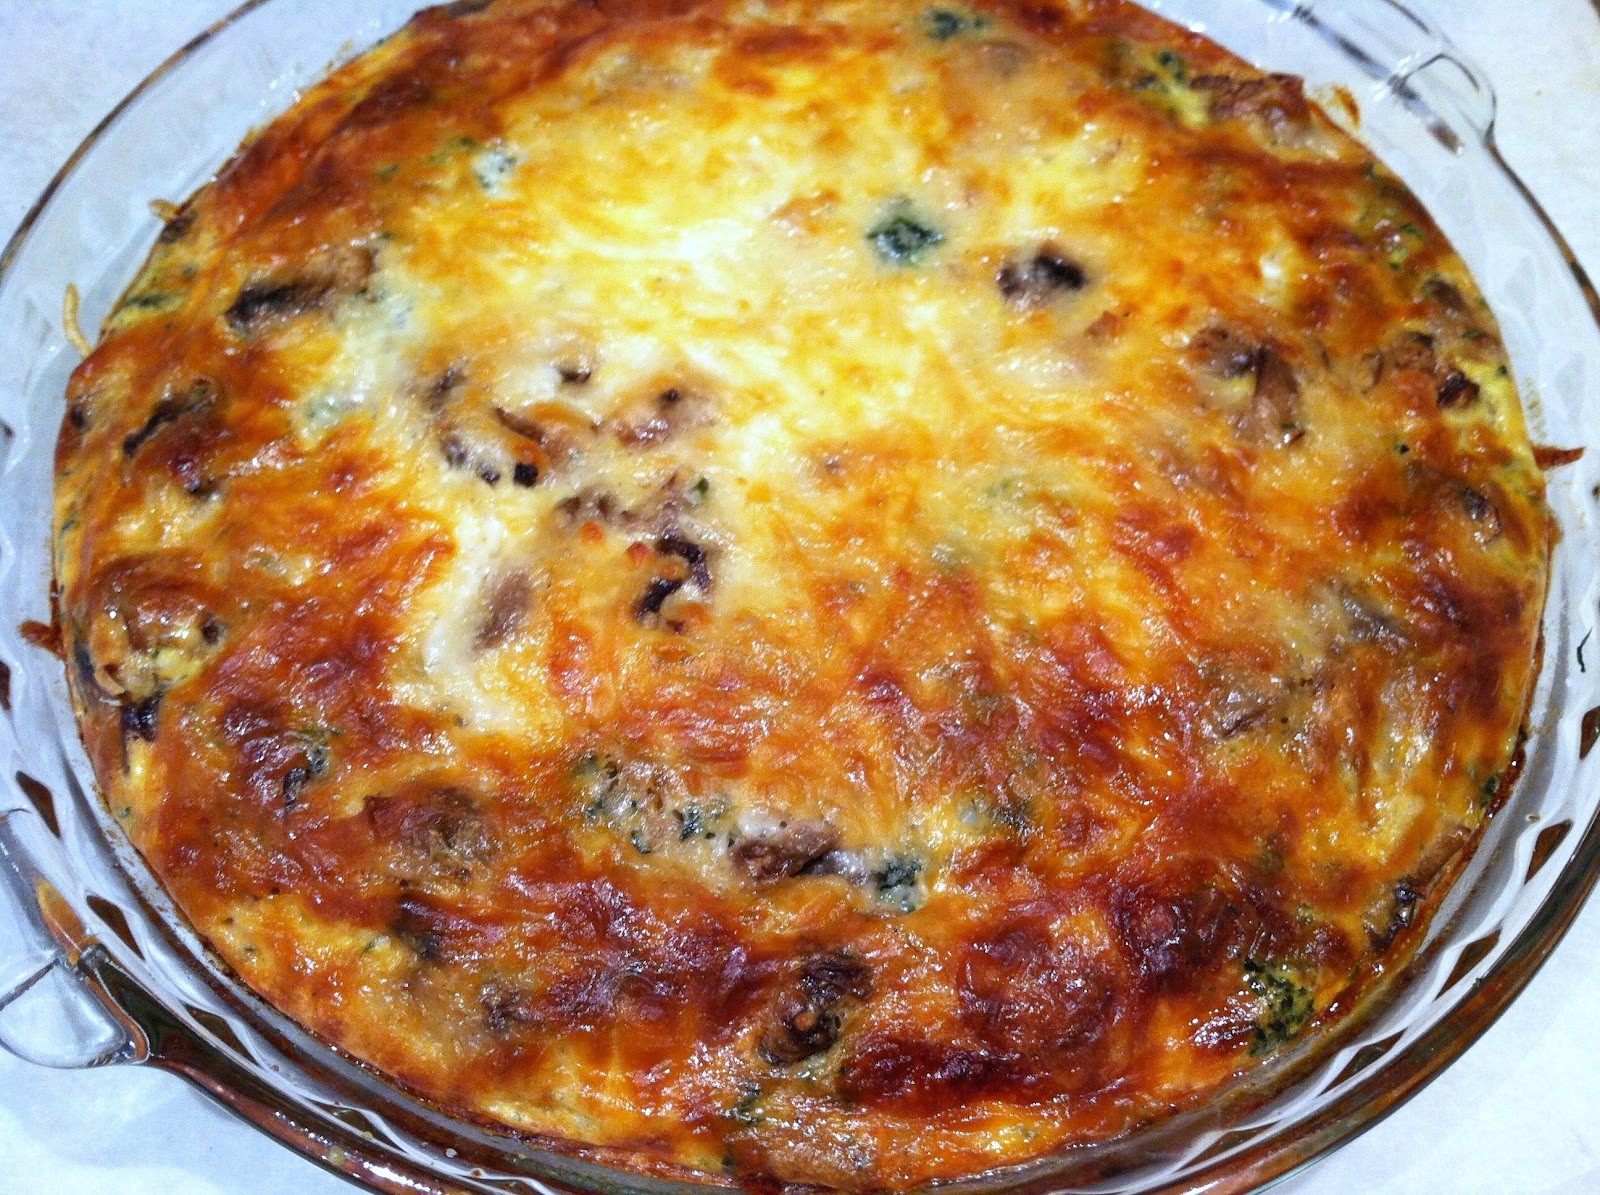 Everything Tasty from My Kitchen: Spinach and Mushroom Crustless Quiche